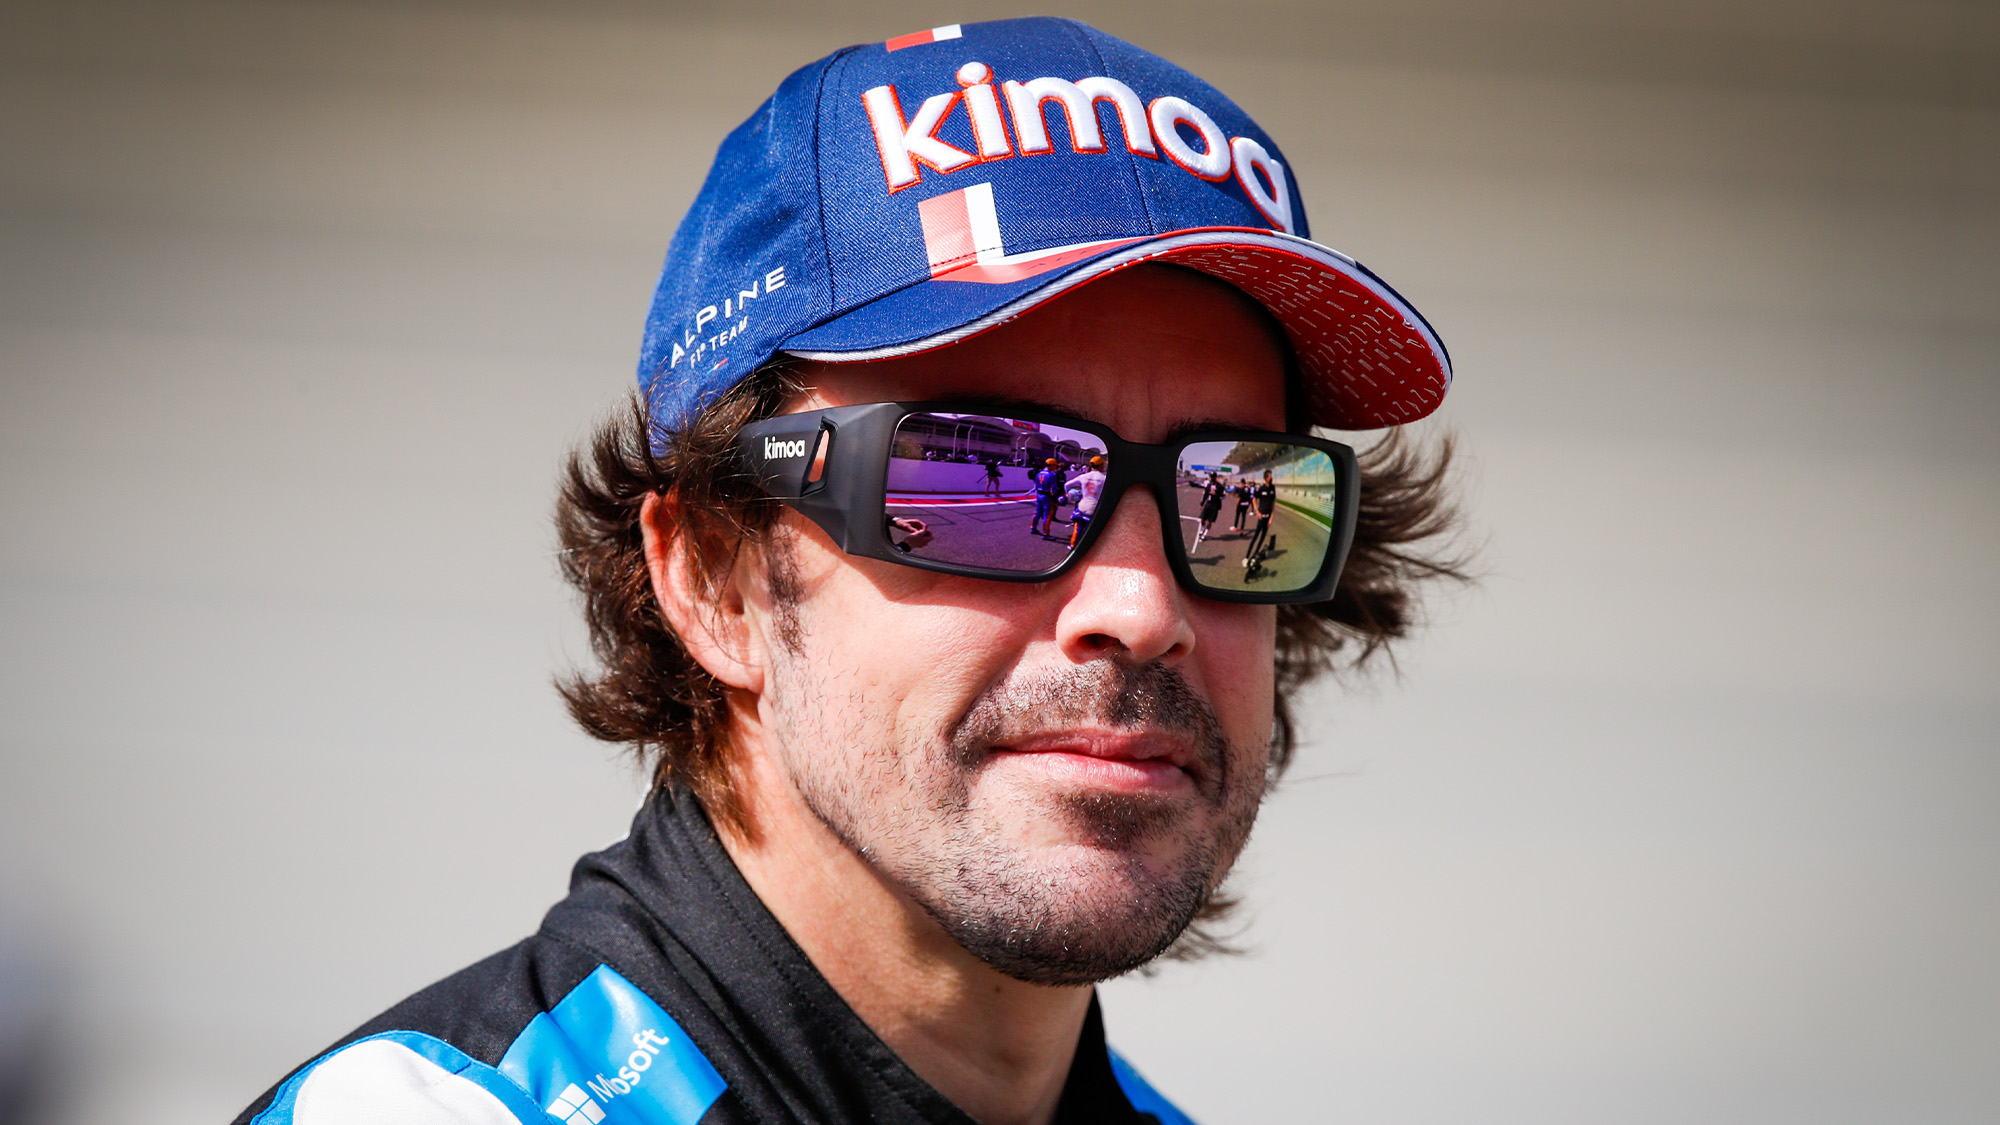 Alonso never imagined he would be still racing at 40 as he celebrates birthday